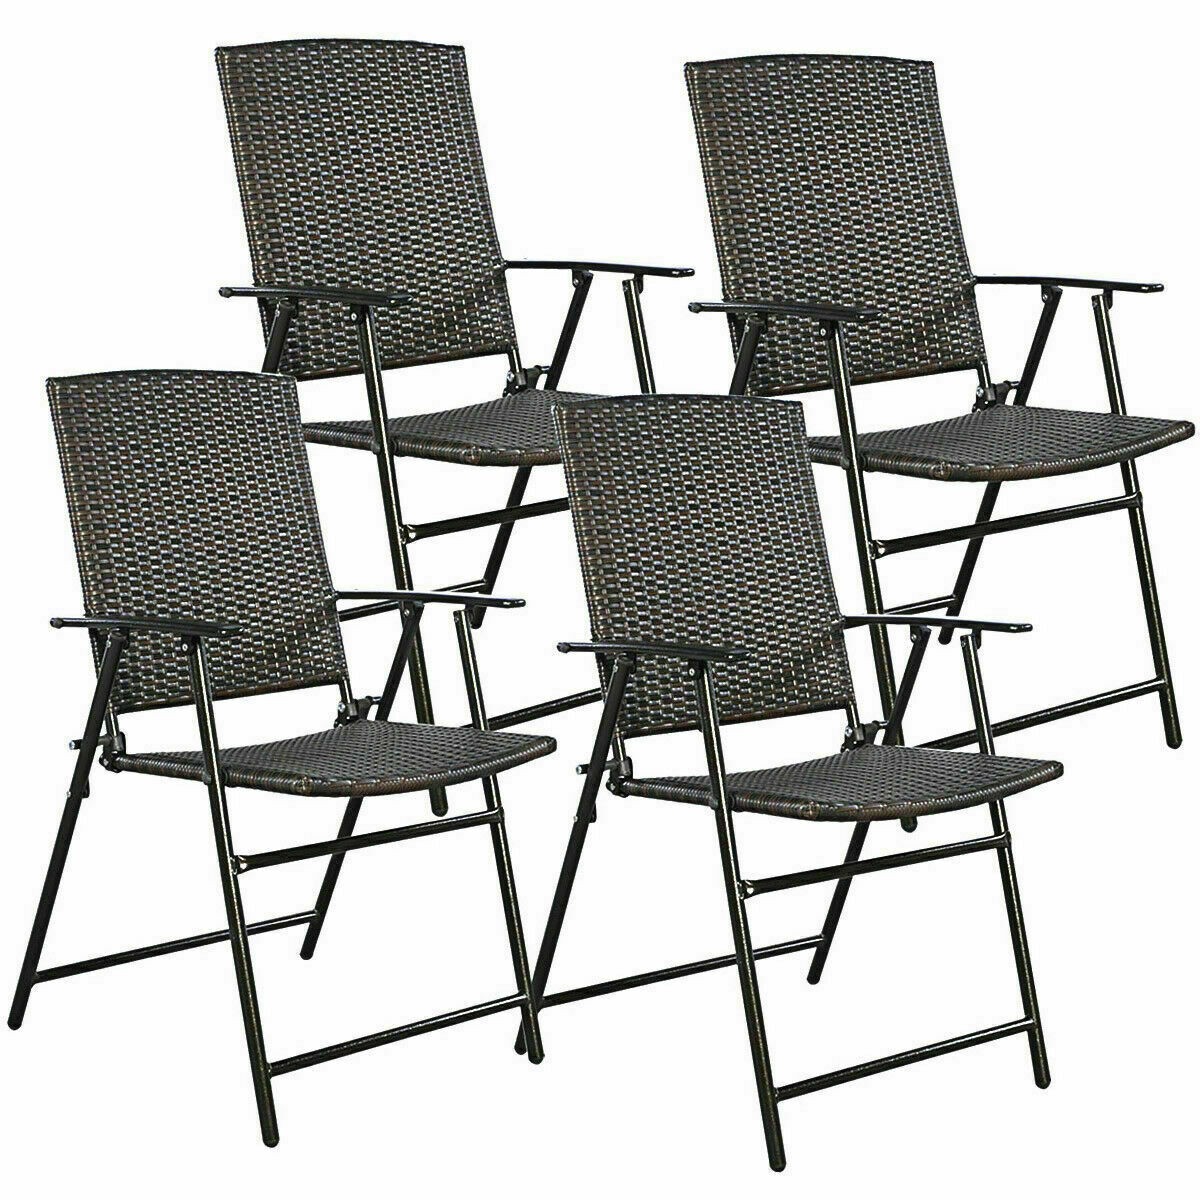 Gymax folding rattan chair brown 4 pcs outdoor indoor